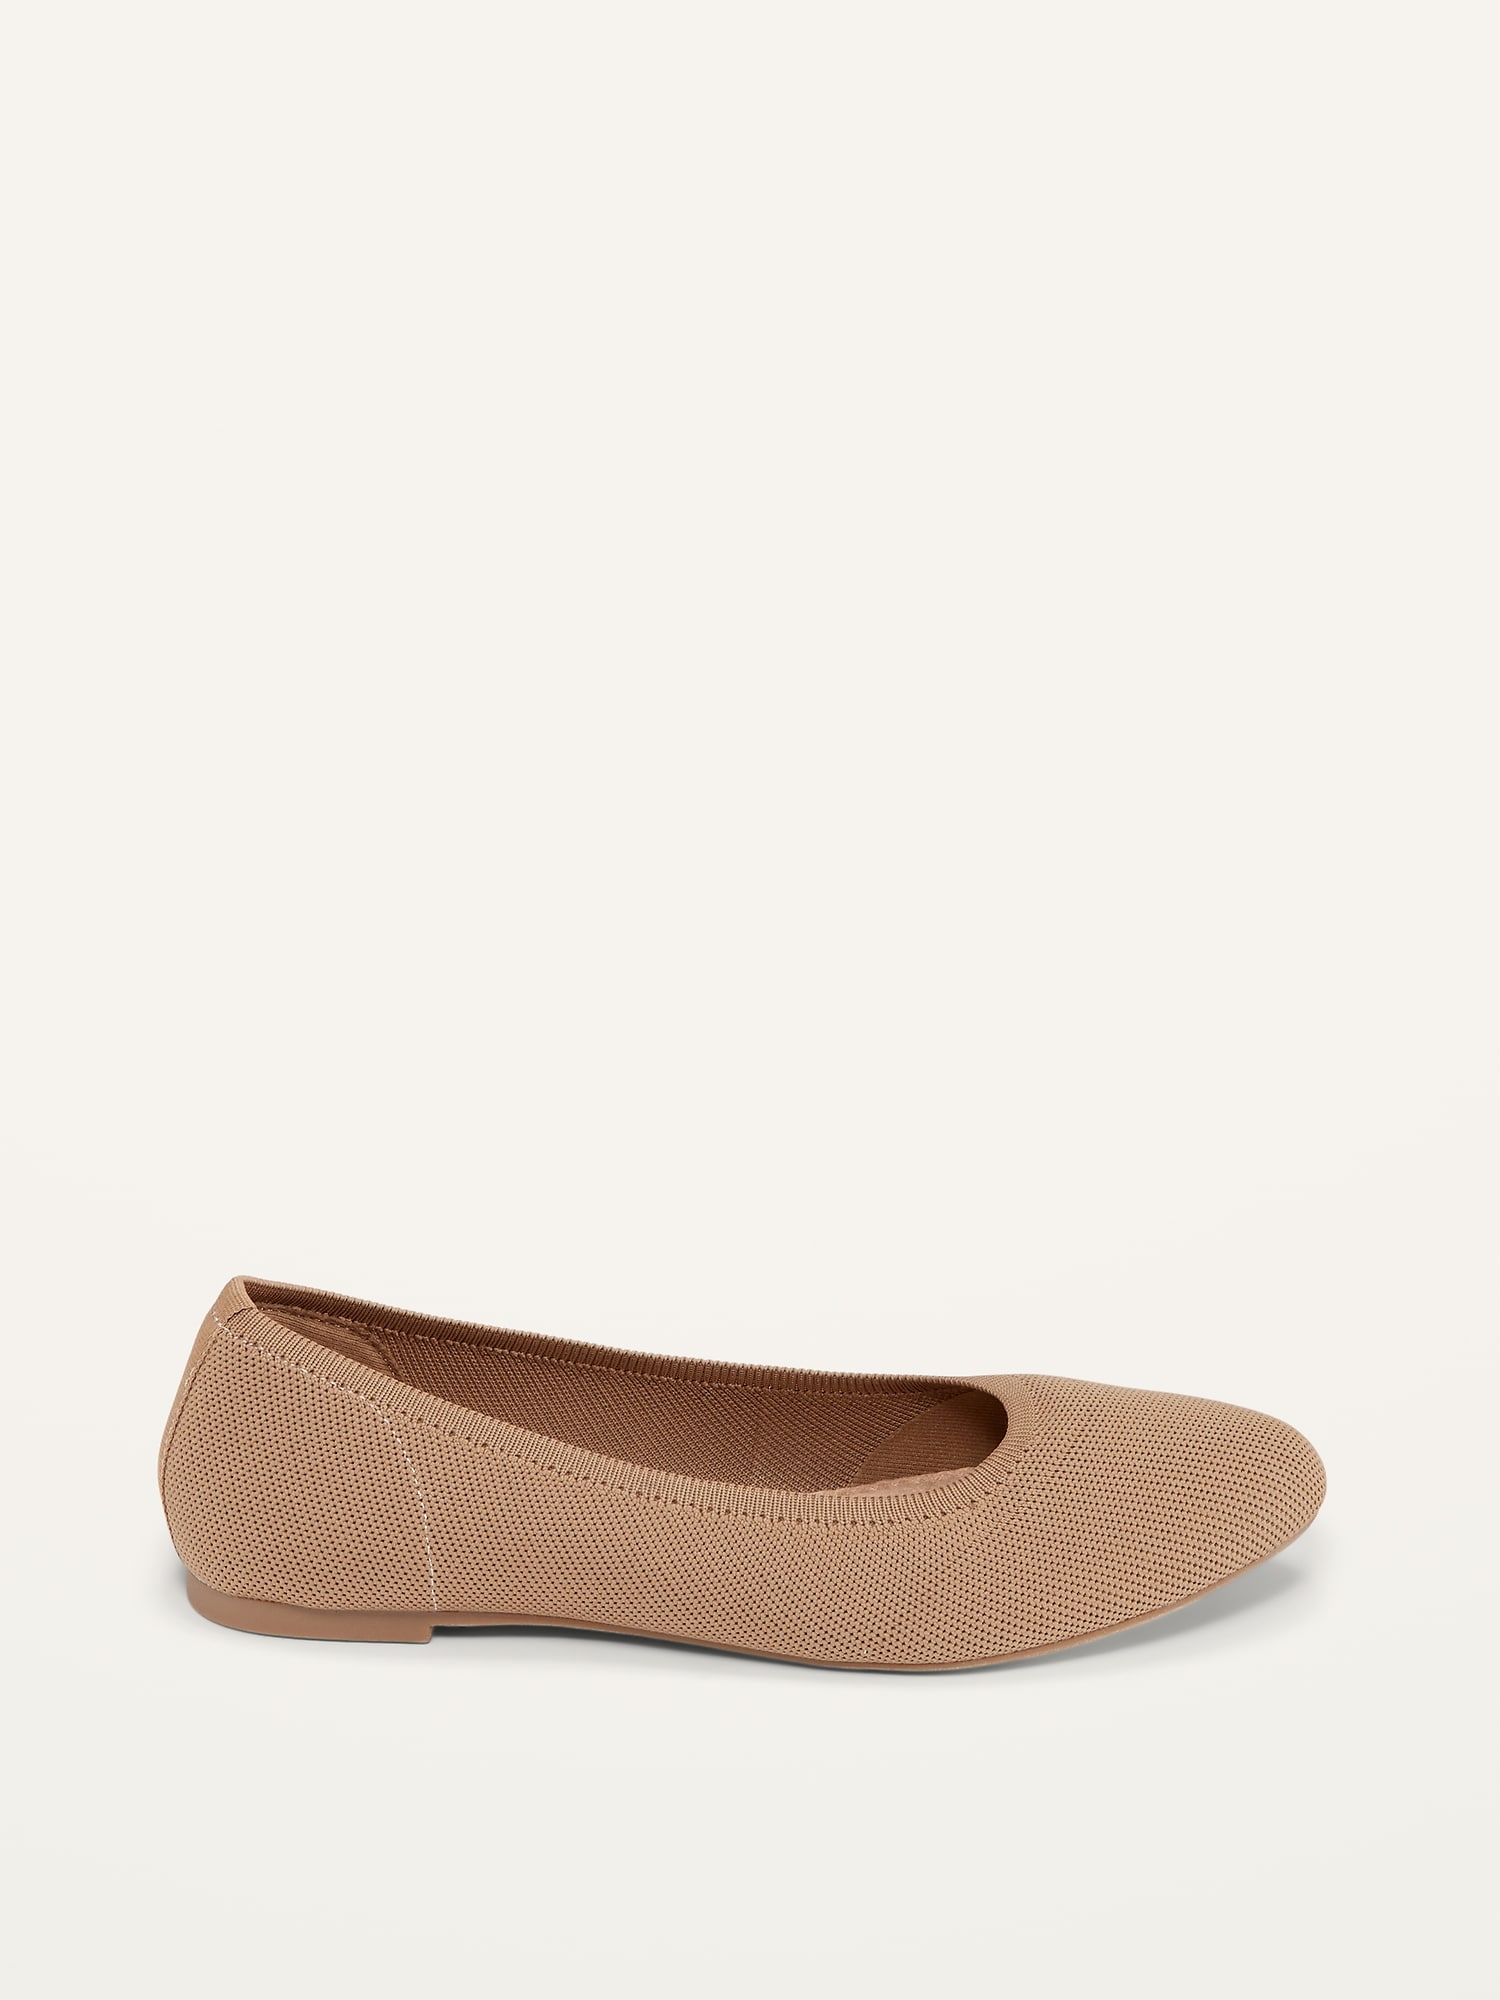 Knit Almond-Toe Ballet Flats For Women | Old Navy